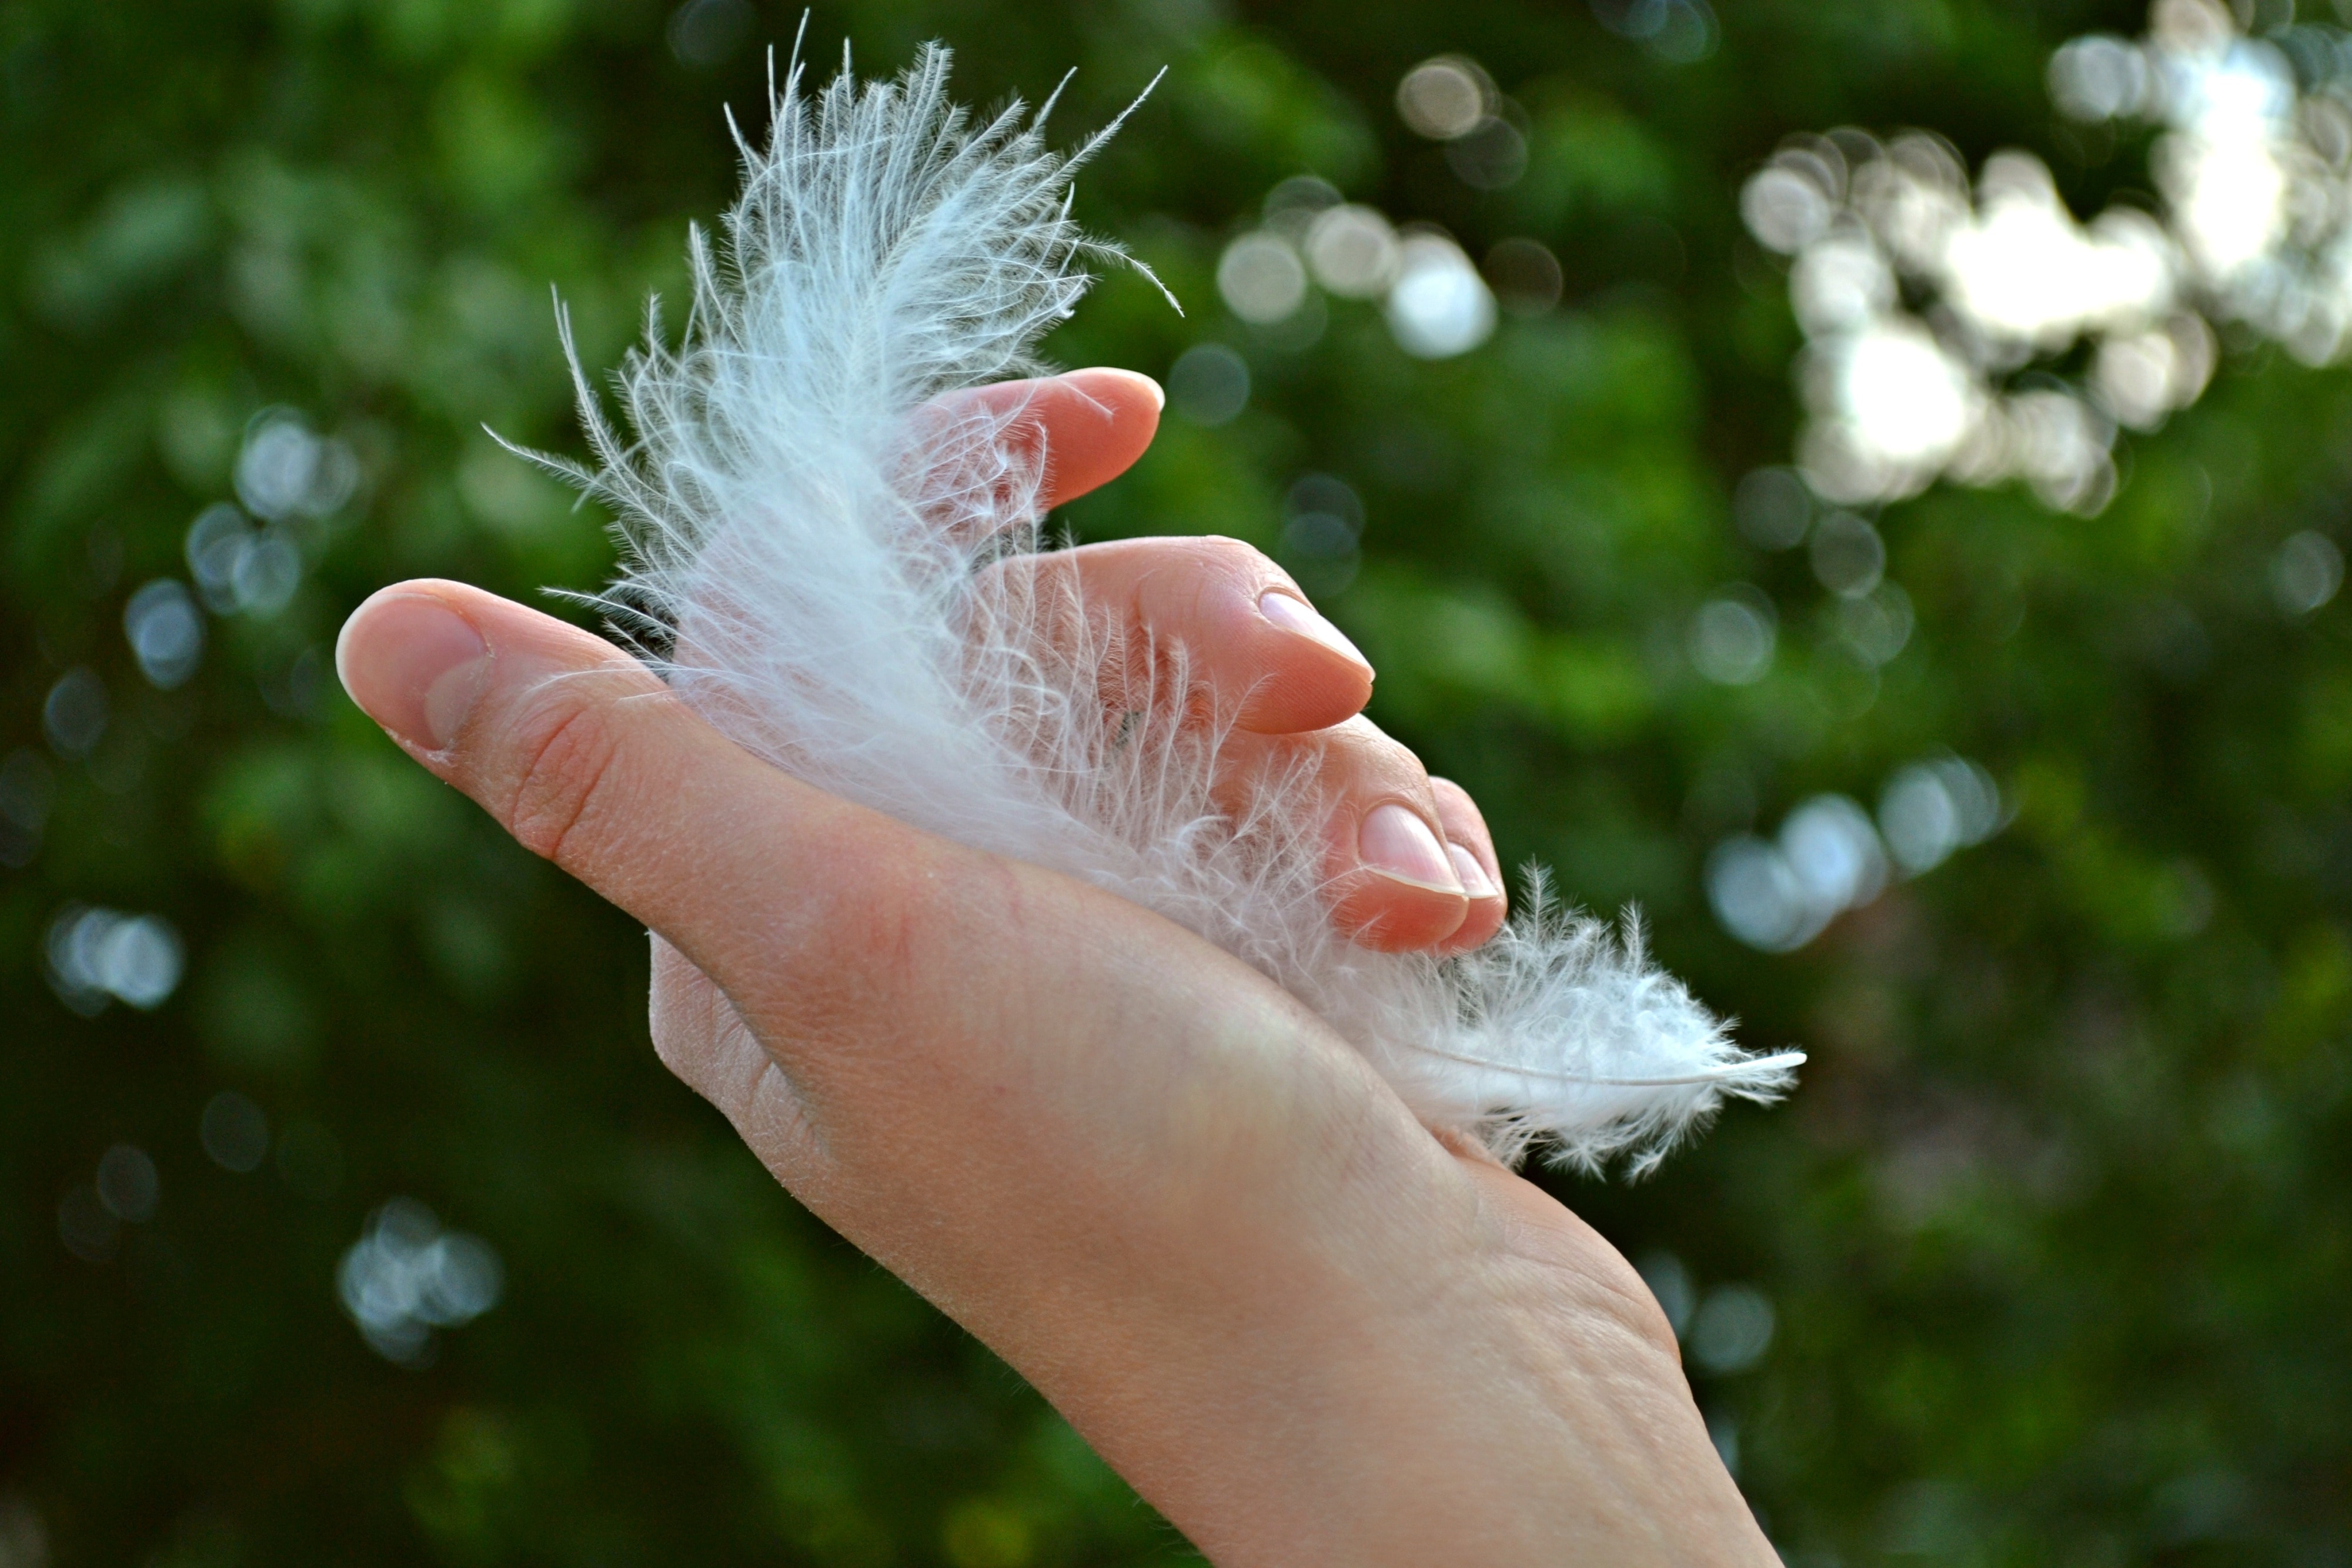 Girl, Plume, Hand, Woman, Feather, one person, outdoors